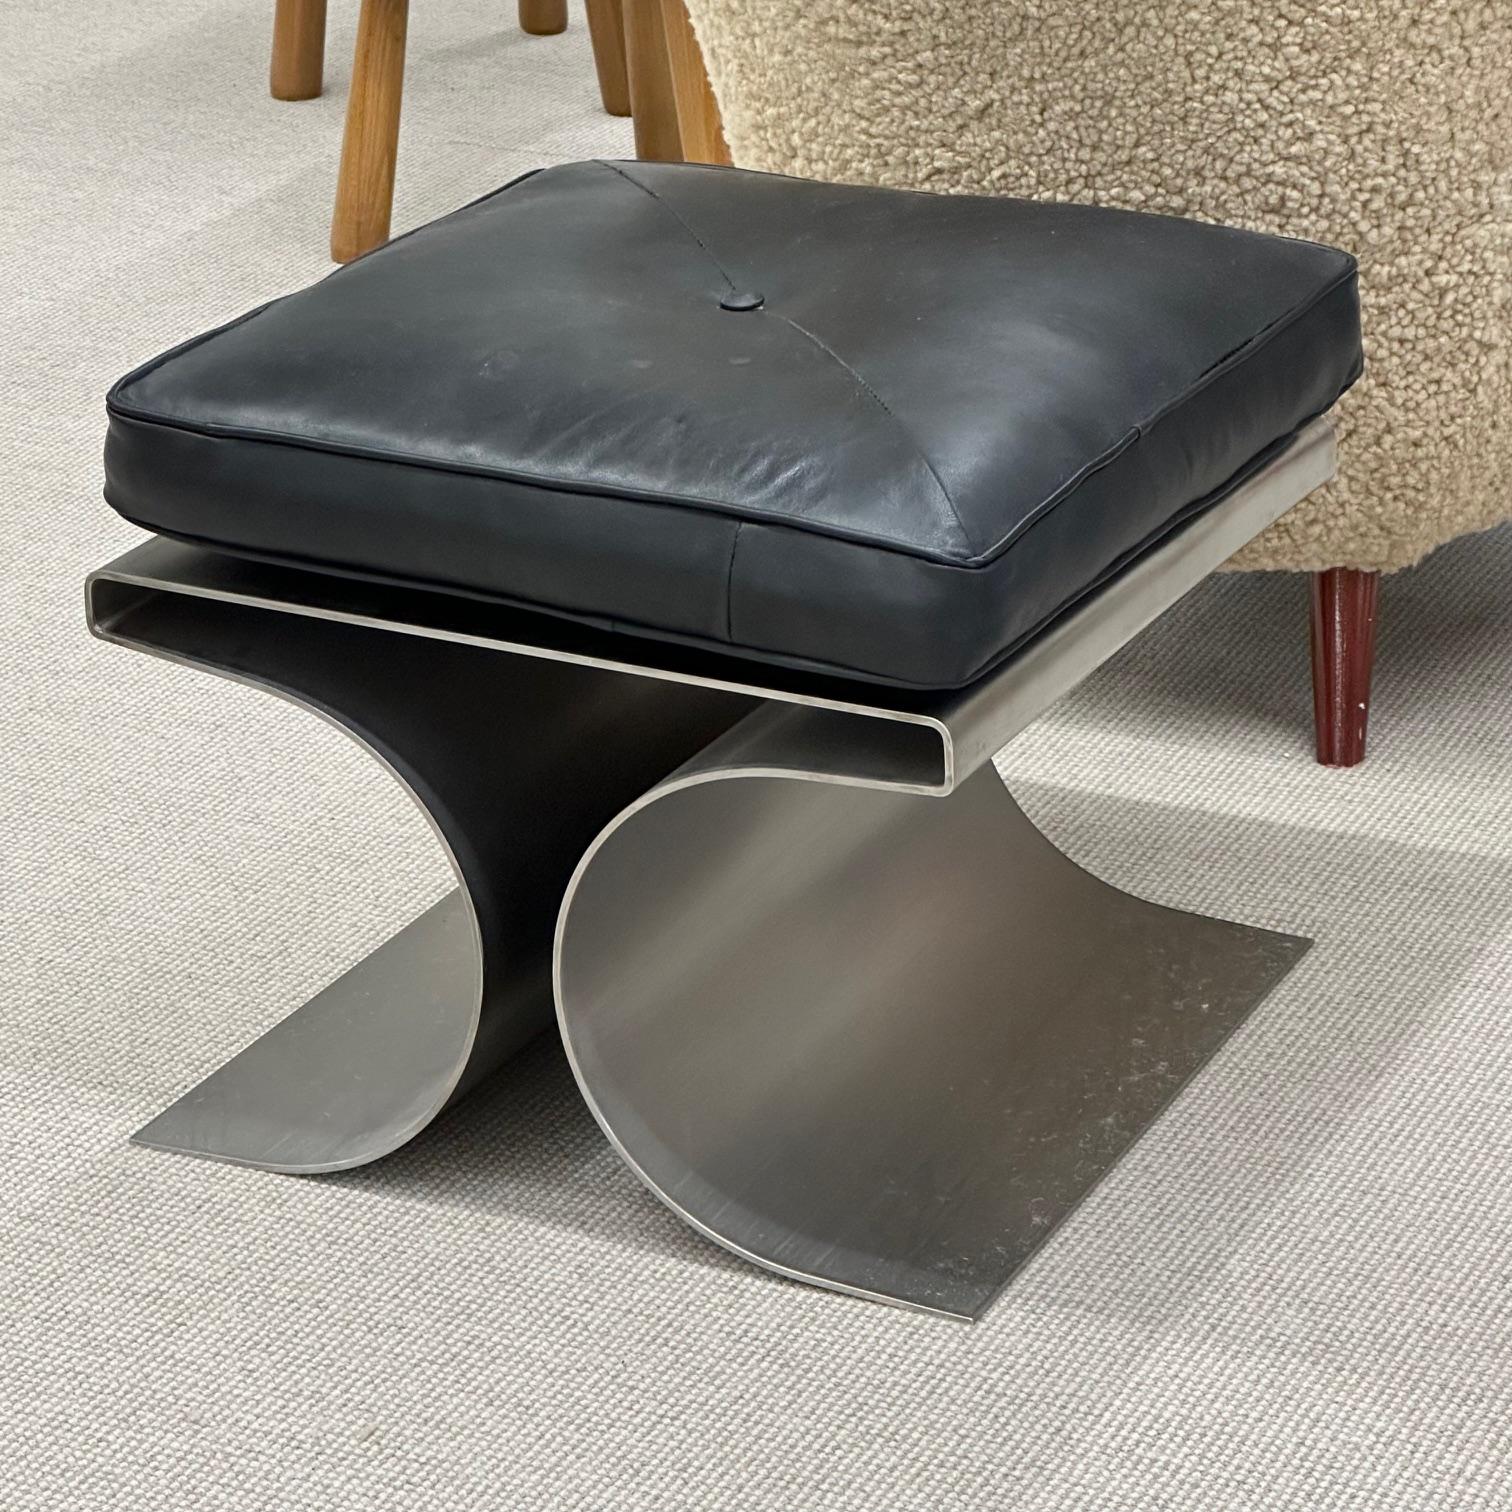 Cut Steel Michel Boyer Style Mid-Century Modern Footstools, Stainless Steel, Black Leather For Sale